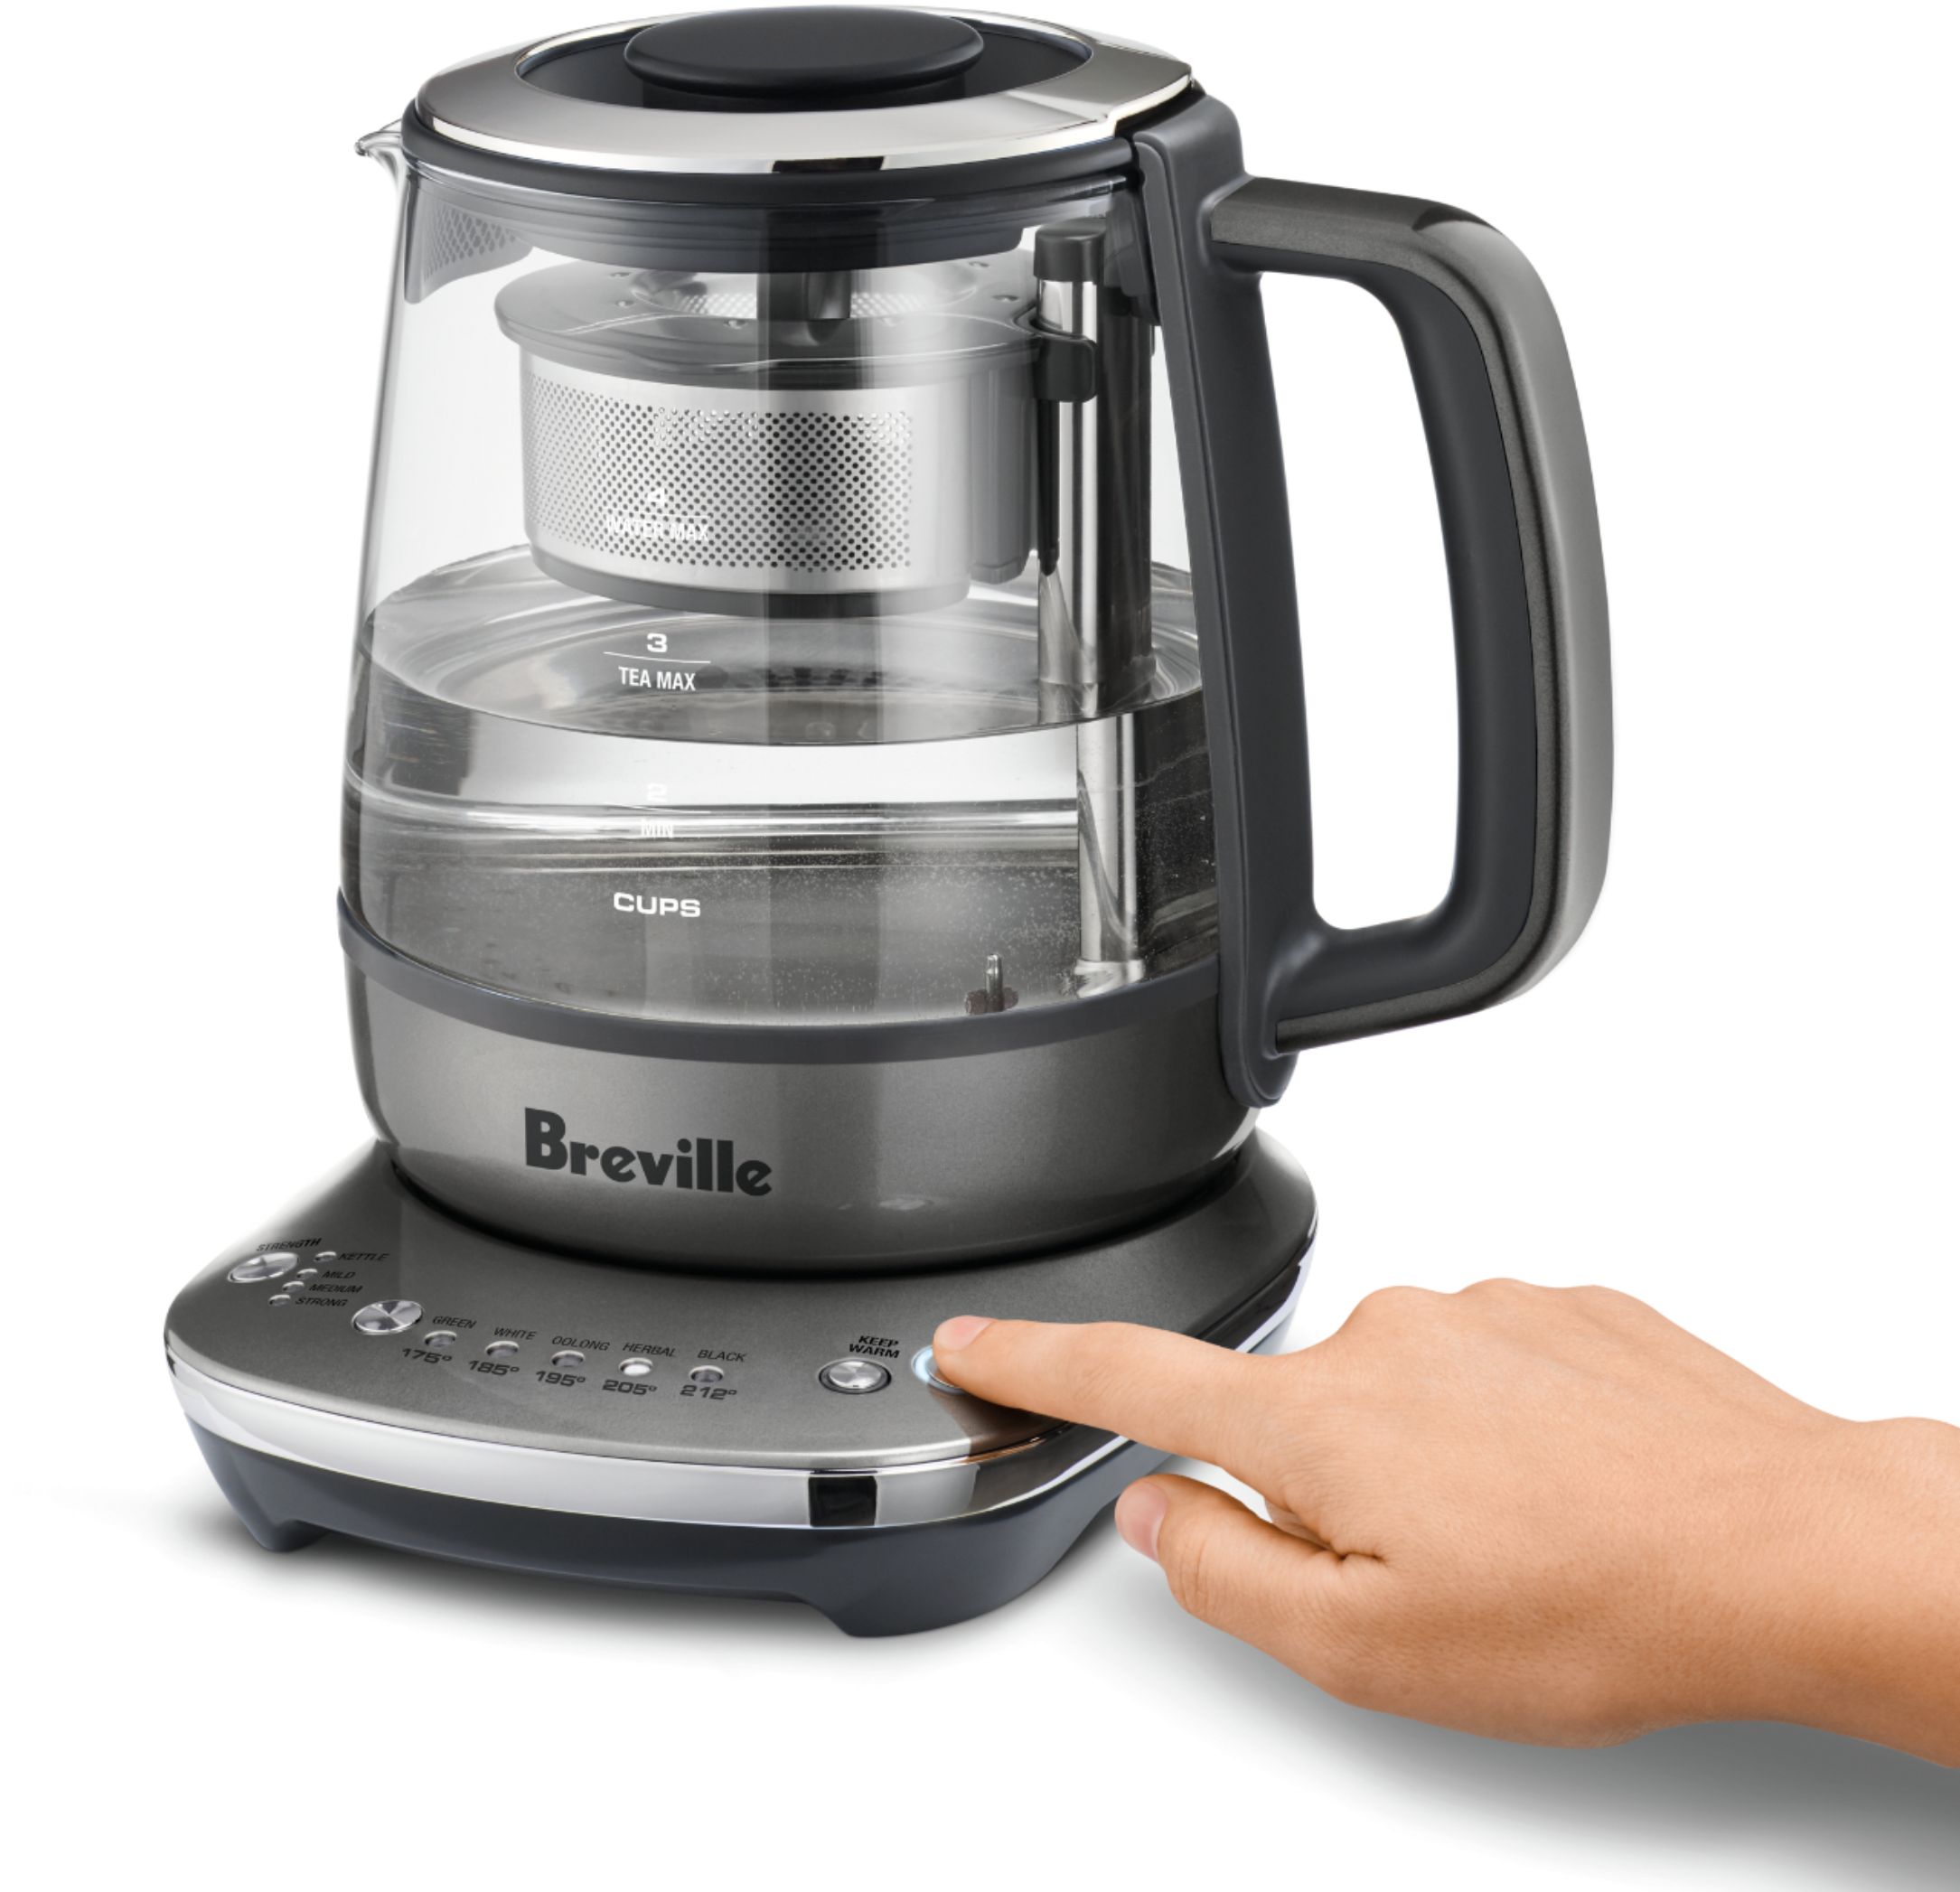 Breville WakeCup Teasmade modern coffee makers and tea kettles